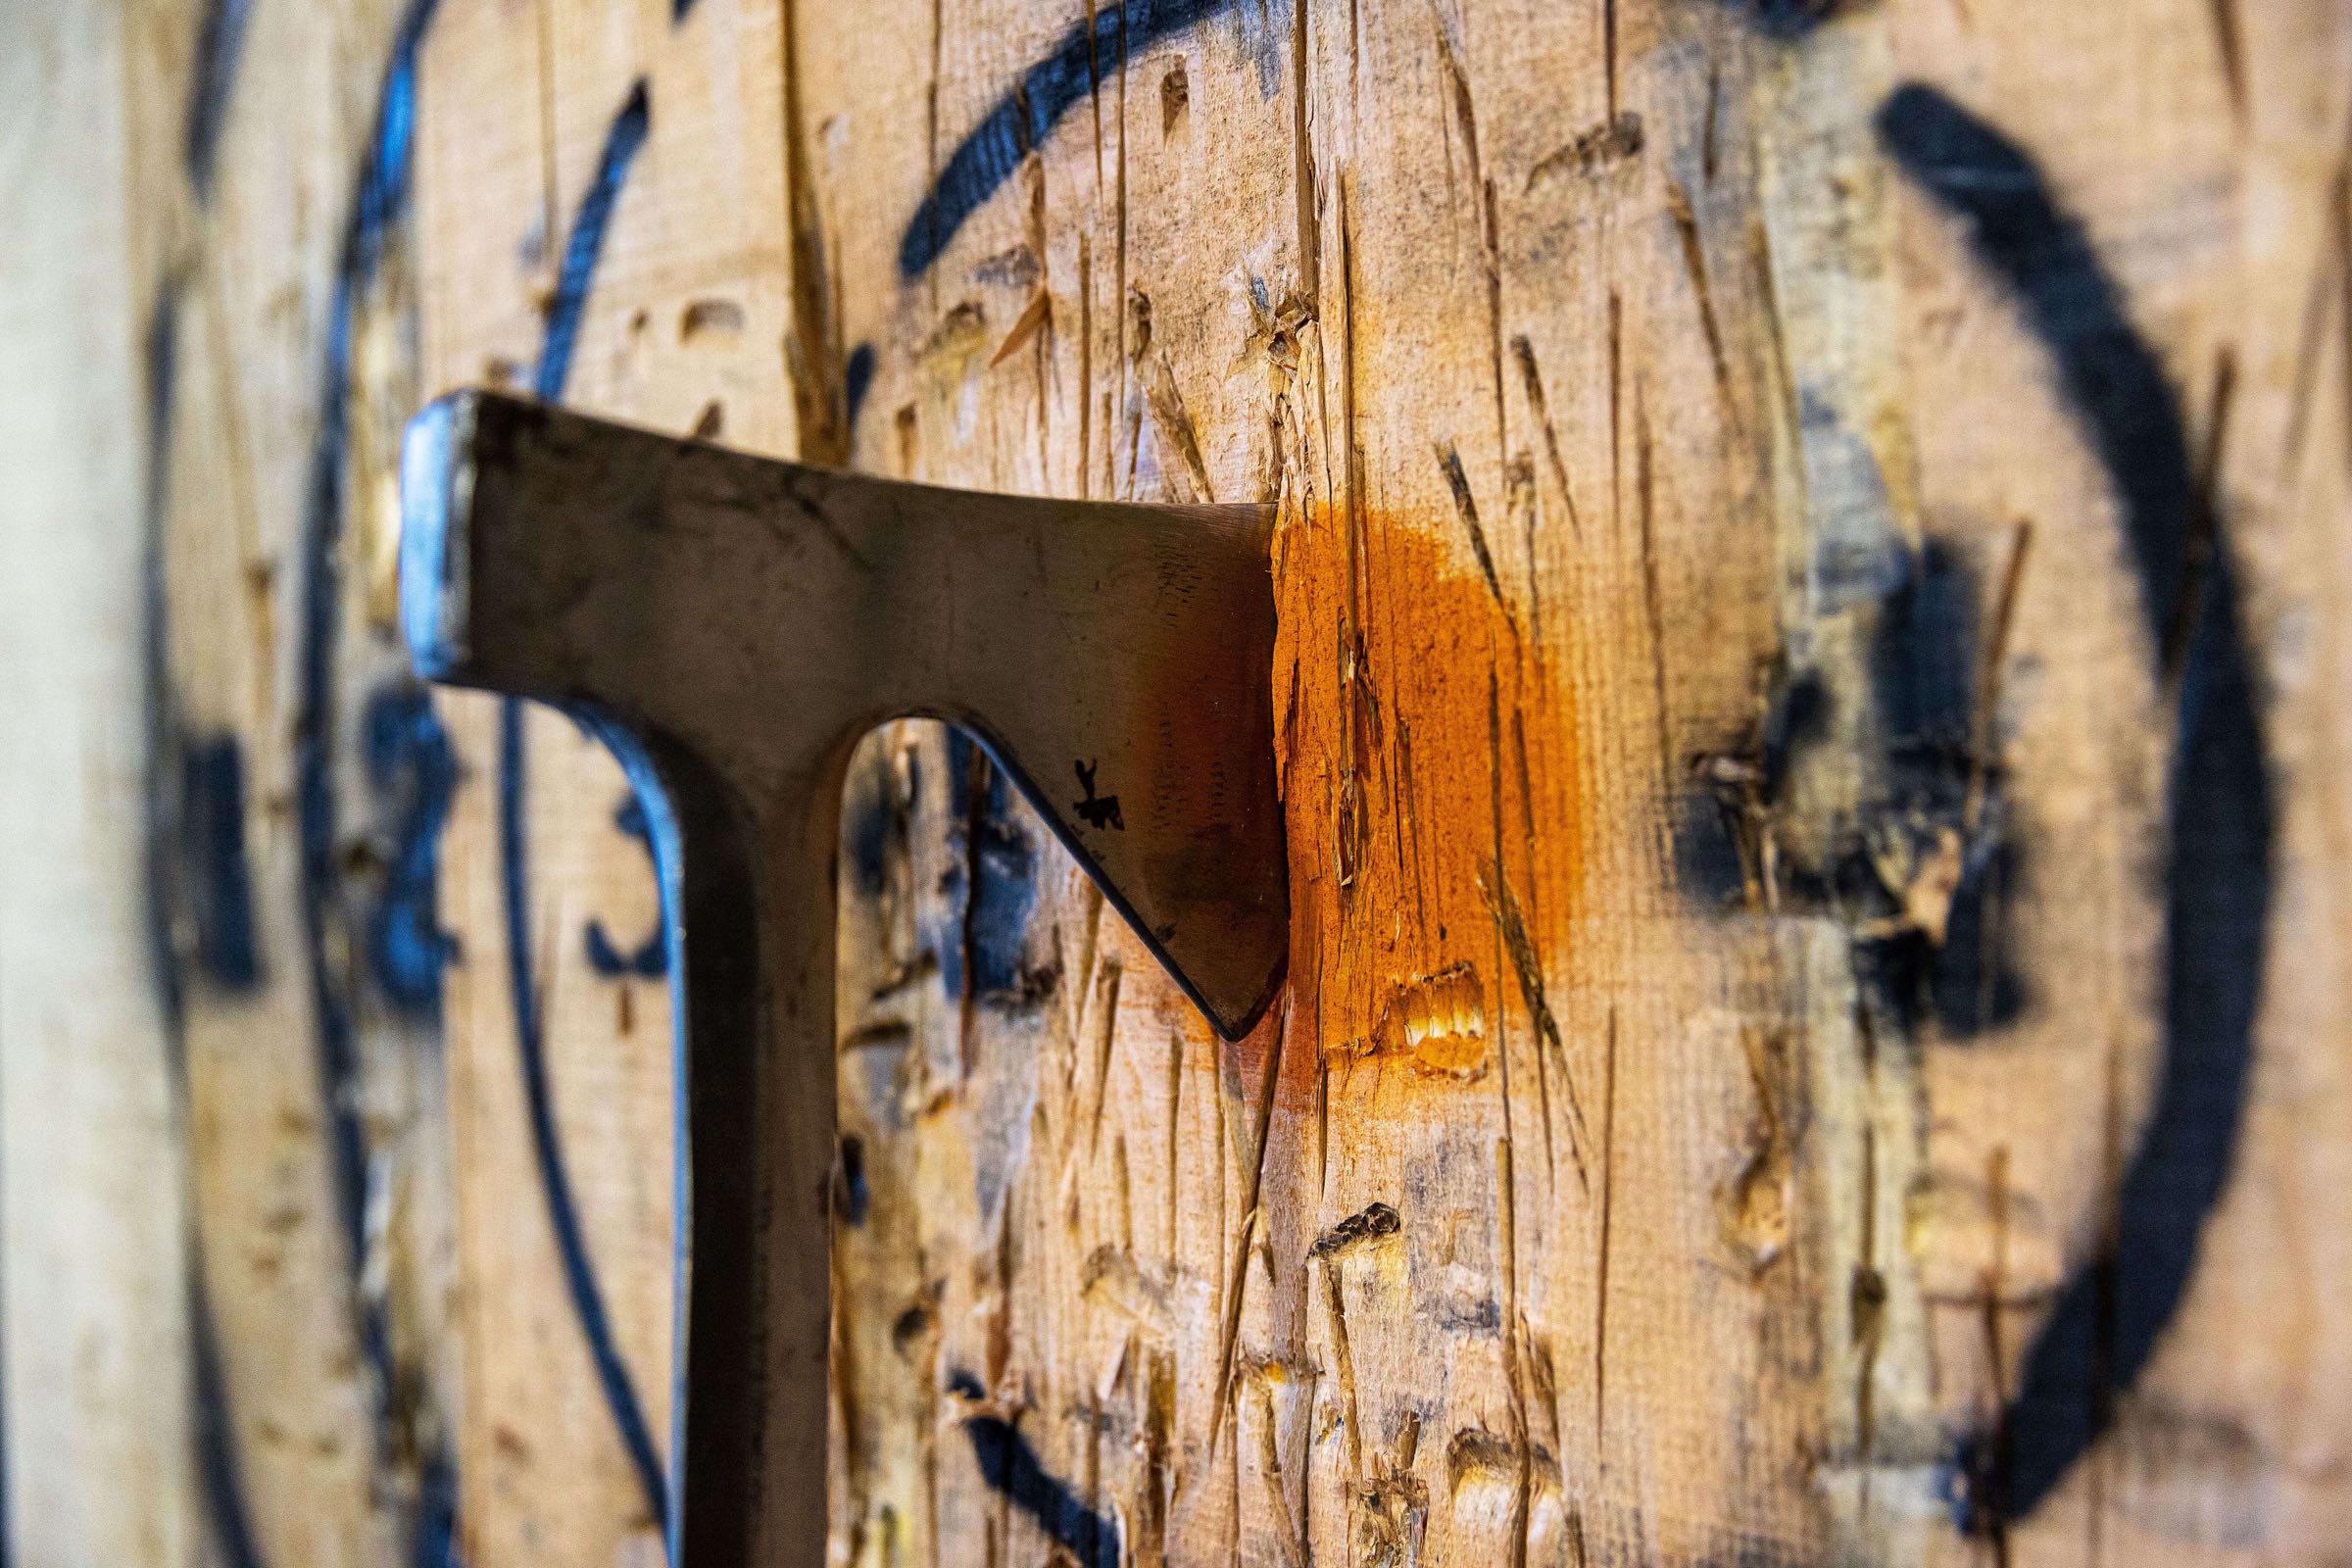 Axe Throwing in Mansfield, Ohio